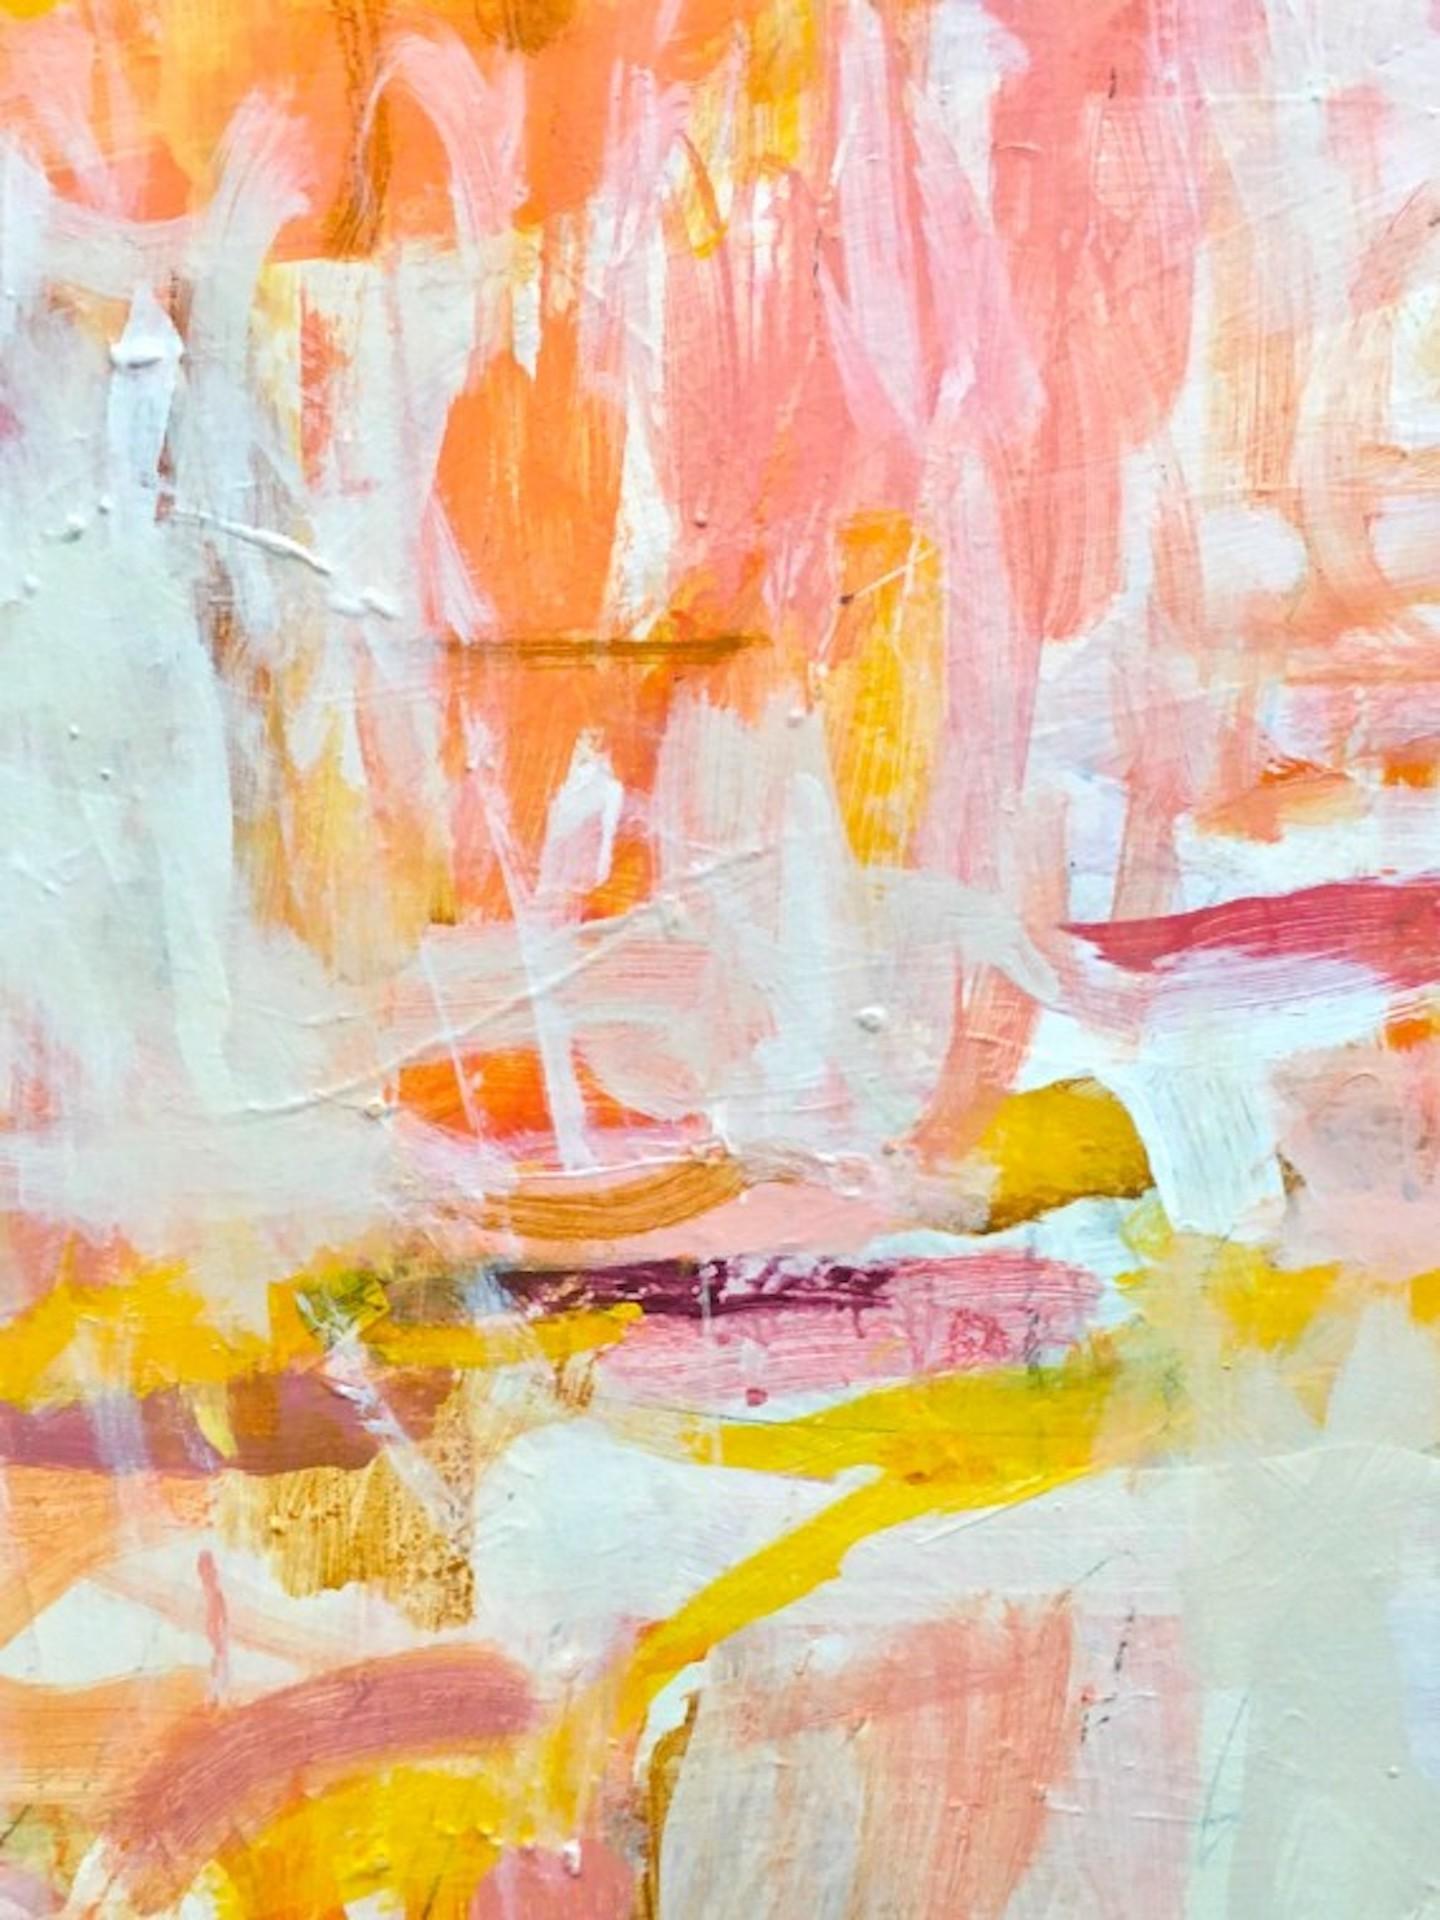 Pink Dawn is an original abstract painting by Janet Keith. The painting is warm and full of life - a dance of flickering brush strokes in a harmony of pinks, oranges and yellow - evocative of sunrise perhaps, uplifting and joyful.
Janet Keith is